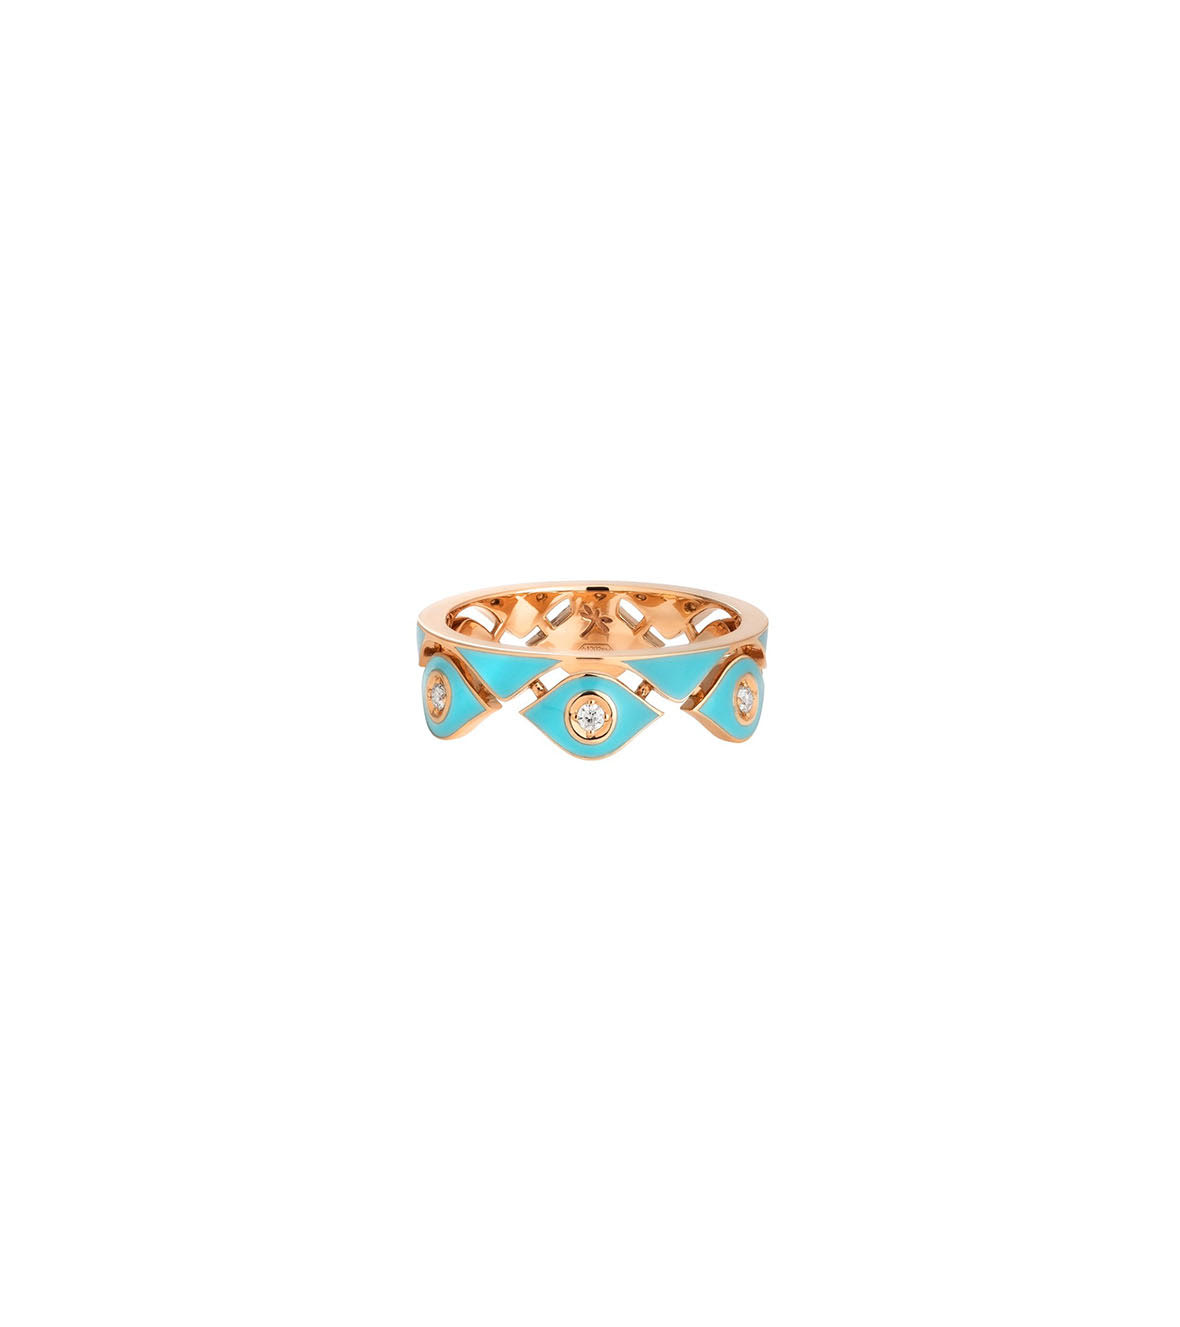 Yellow Gold Ring with Diamonds and Turquoise Enamel Casato MX1527BT-Y